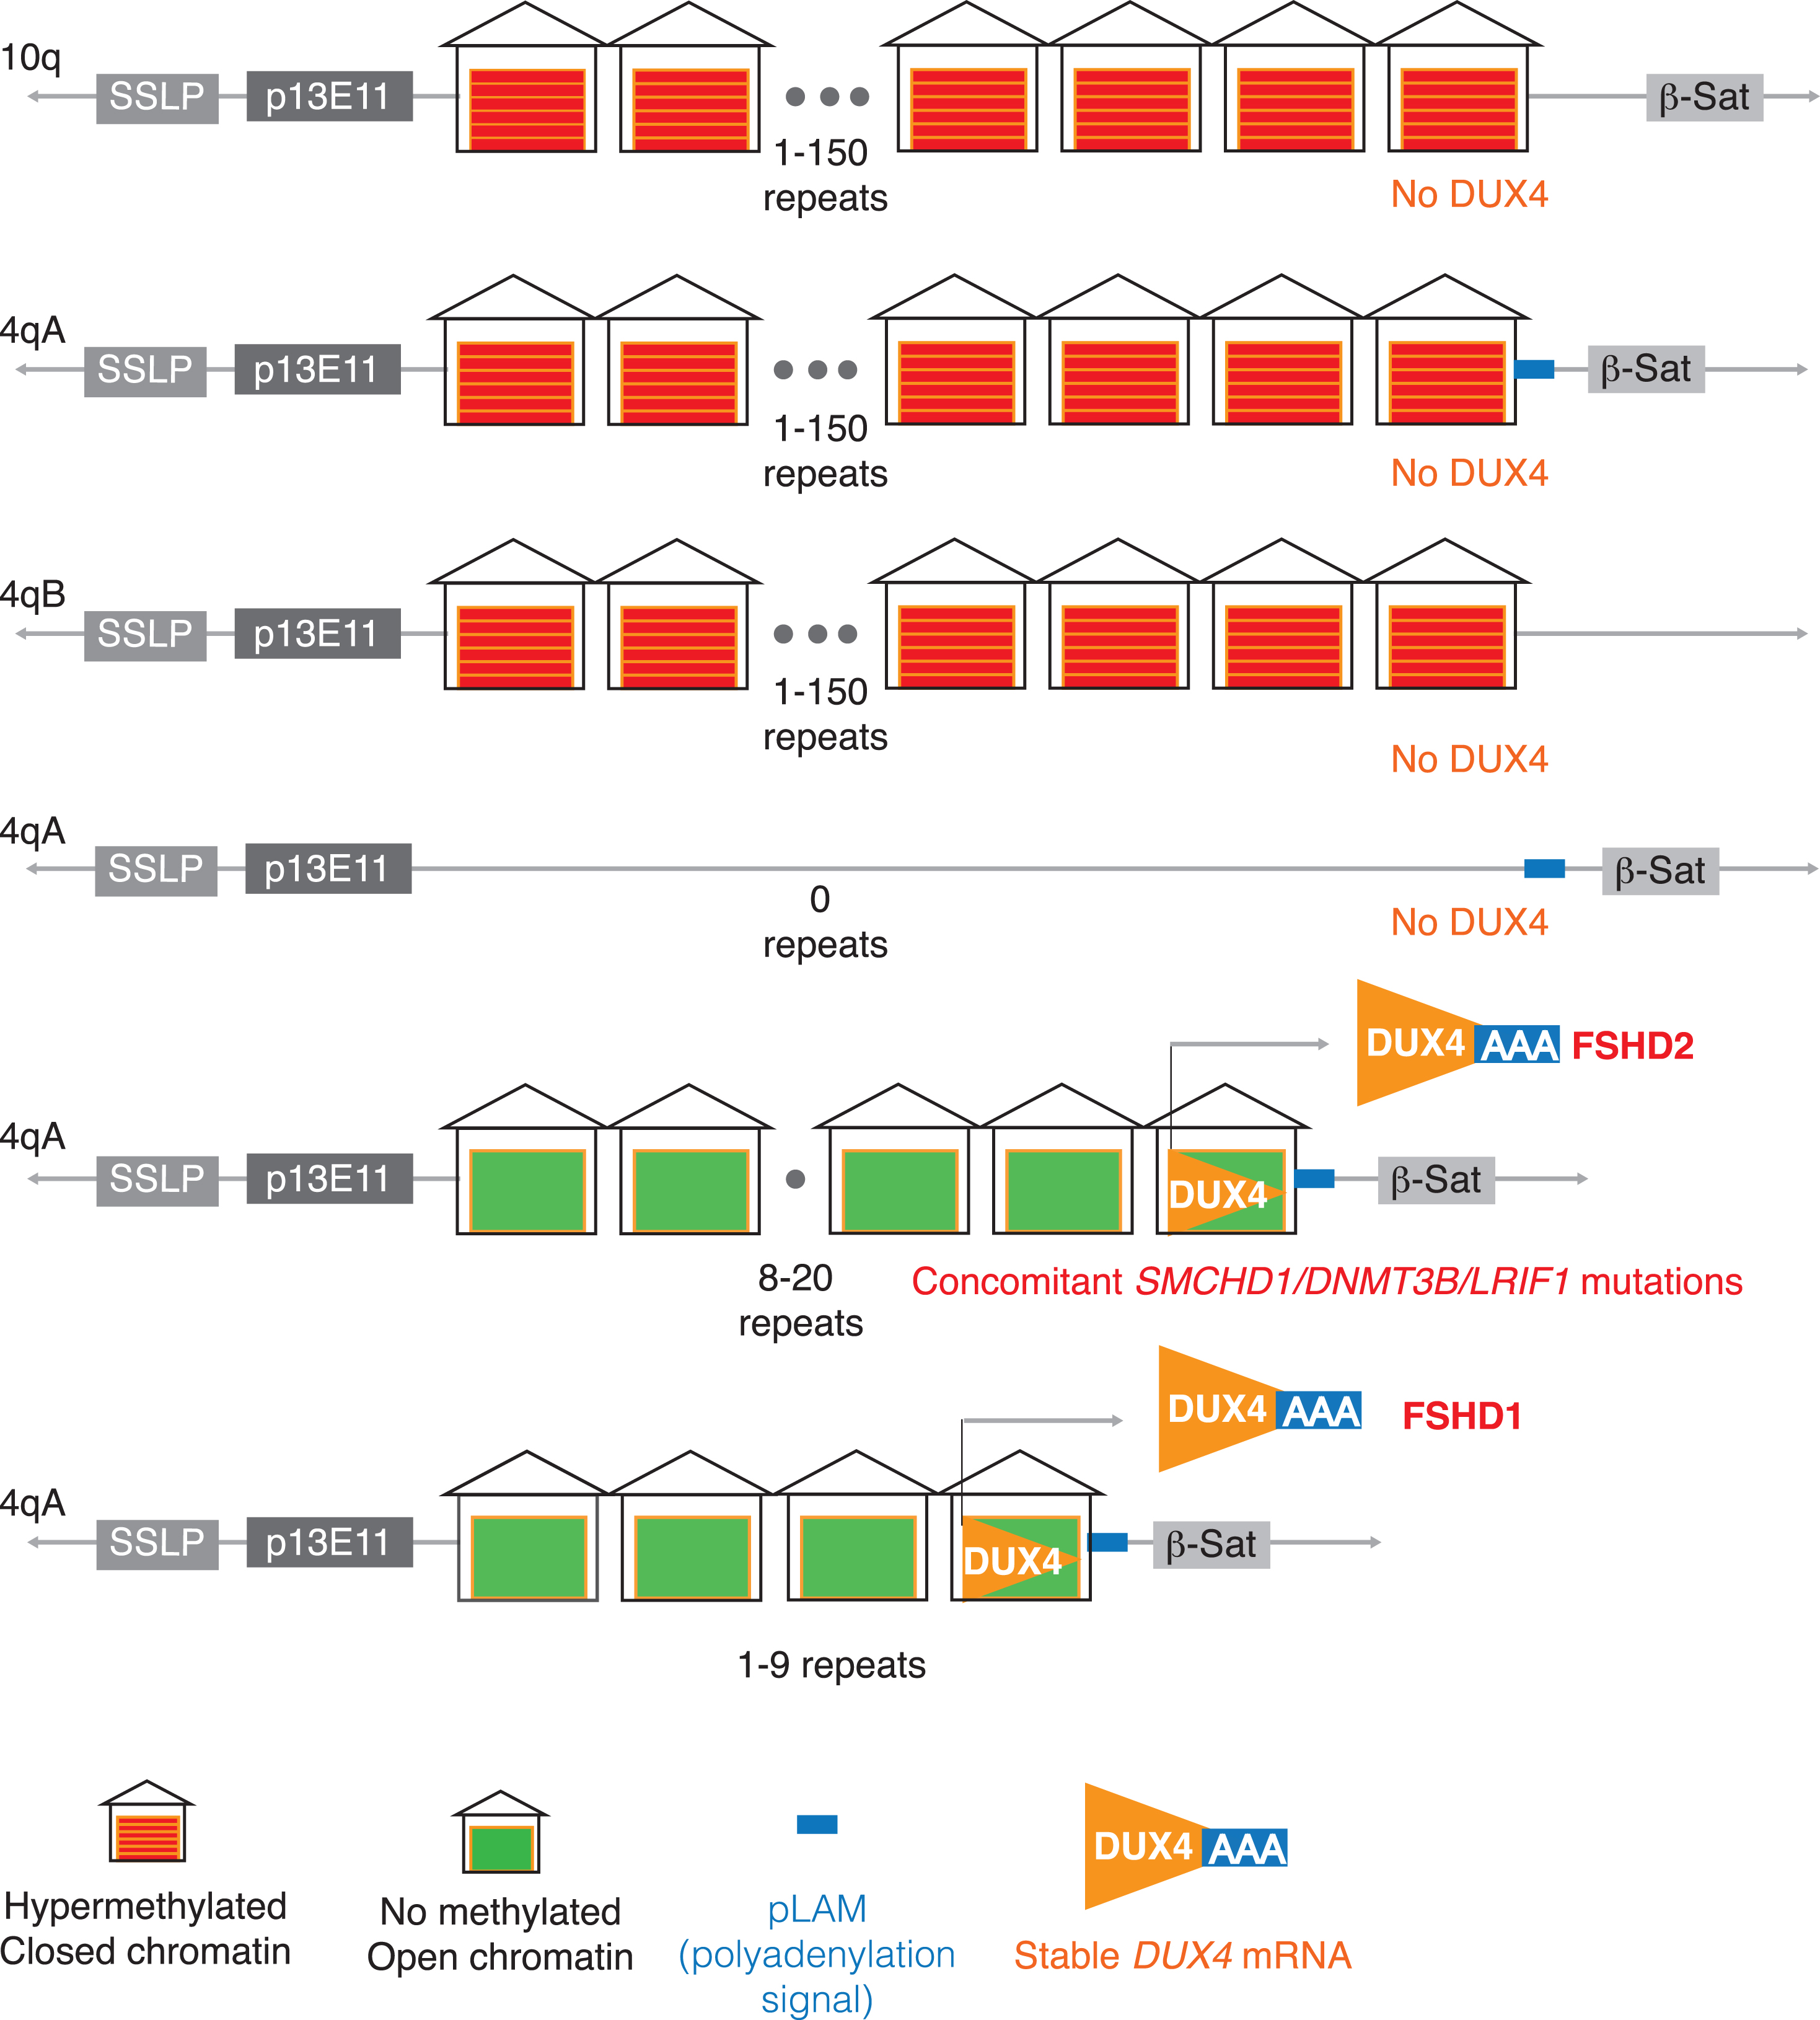 DUX4 genetics. The production of DUX4 in human muscles requires the breakdown of the multiple genetic safeguards evolved to suppress its expression in somatic cells: 1) The presence of more than 10 tandem repeat units on 4q that allow for heterochromatin condensation [91]; 2) GC-rich sequence (73%) in the repeat that allow for methylation [92]; 3) a polyadenylation signal that cannot be used in somatic/muscle cells in ∼50% of the European population [93]; 4) histone modification H3K9me3 to cause a repressive chromatin state. The utilization of the 4qA polyadenylation signal seems to be specific in somatic cells and may be aided by muscle-specific enhancers [94] in the proximal end of 4q that may aid in the transcription of DUX4 and the stabilization of the mRNA. The polyadenylation signal is critical for pre-mRNA processing and allows for DUX4 pre-mRNA cleavage and extension of polyadenylation to the mRNA [95]. The pathomechanism of derepression of DUX4 as the cause of FSHD was discovered because of careful study of the genetic structure of the 4q locus and the many naturally occurring cross-over events with the 10q subtelomere and the conclusions are: 1) A single repeat containing DUX4 is required; as an individual with complete loss of 4q subtelomeric region did not have FSHD [96]; 2) The region proximal to DUX4 on 4q and absent on 10q, including the upstream region with FRG1, SLC25A4 (ANT1) and DUX4c genes, is not required because a translocation of the most distal end of 4q to 10q resulted in FSHD; 3) 10q contraction (as found in ∼10% of the normal population) does not result in FSHD [97–99]—most likely because while 10q has similarity to the permissive 4qA alleles with the presence of 6.2-kb β-satellite sequence, it lacks the polyadenylation signal—similar to the non-permissive 4qB alleles.